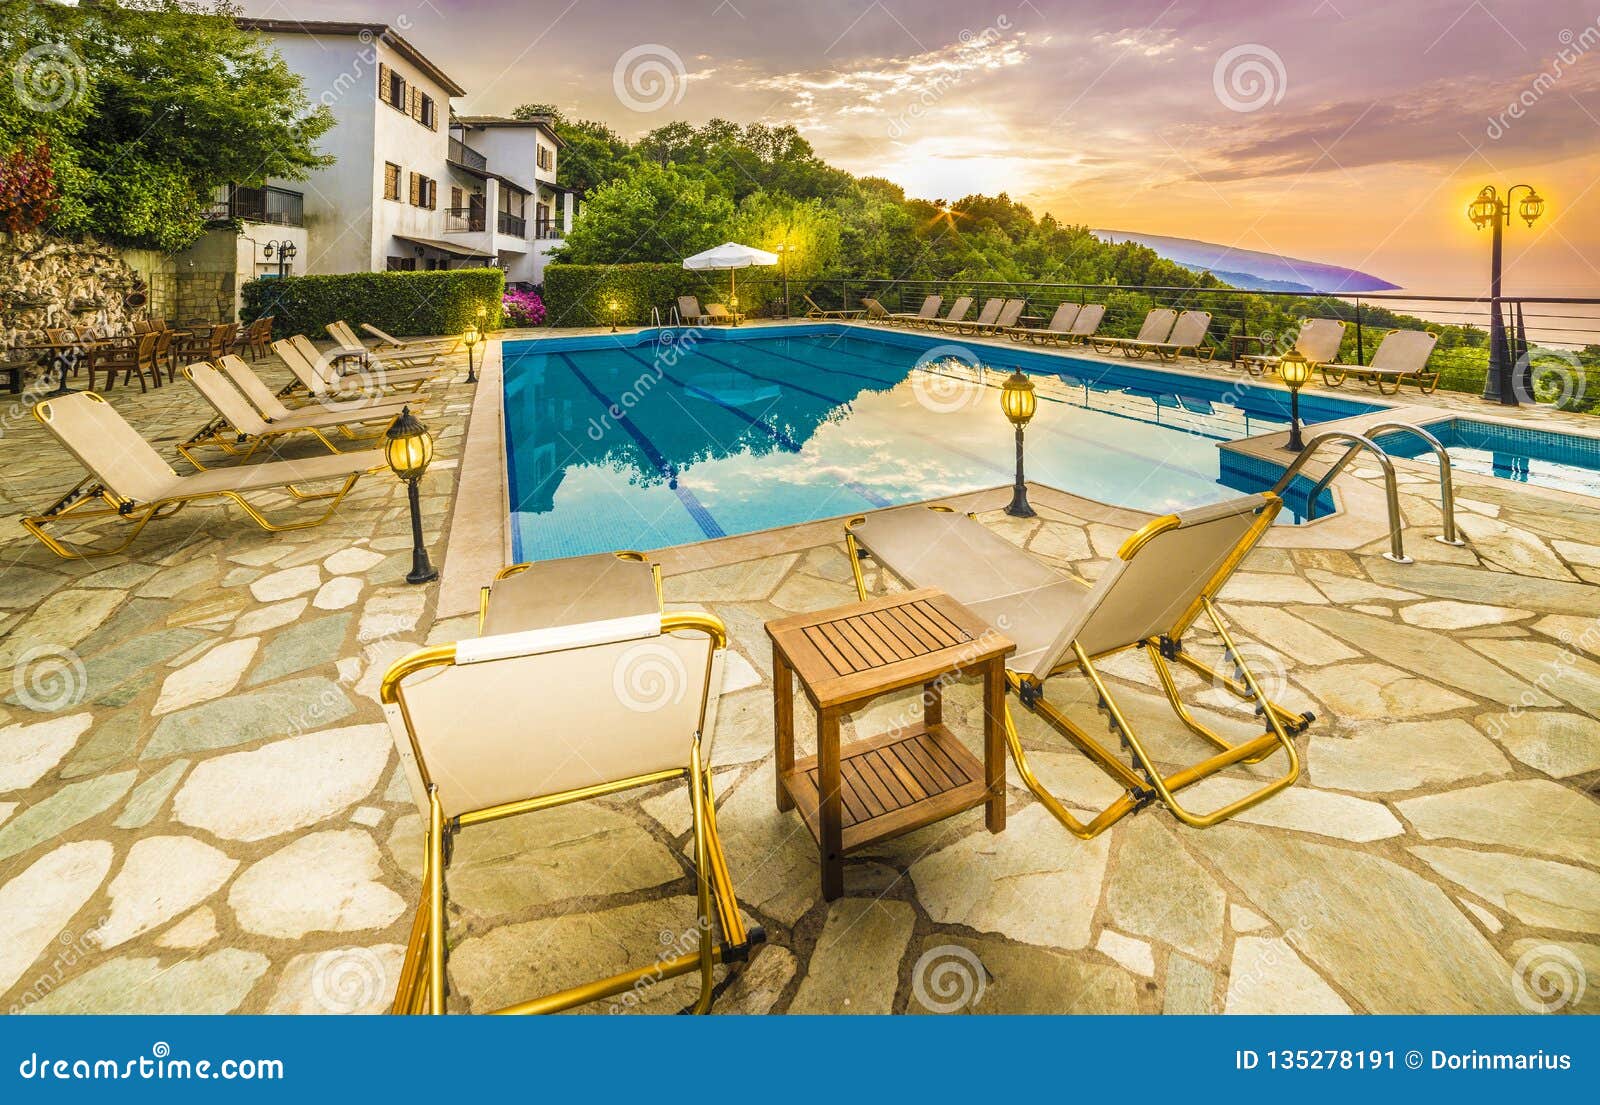 romantic sunrise over the house and swimming pools